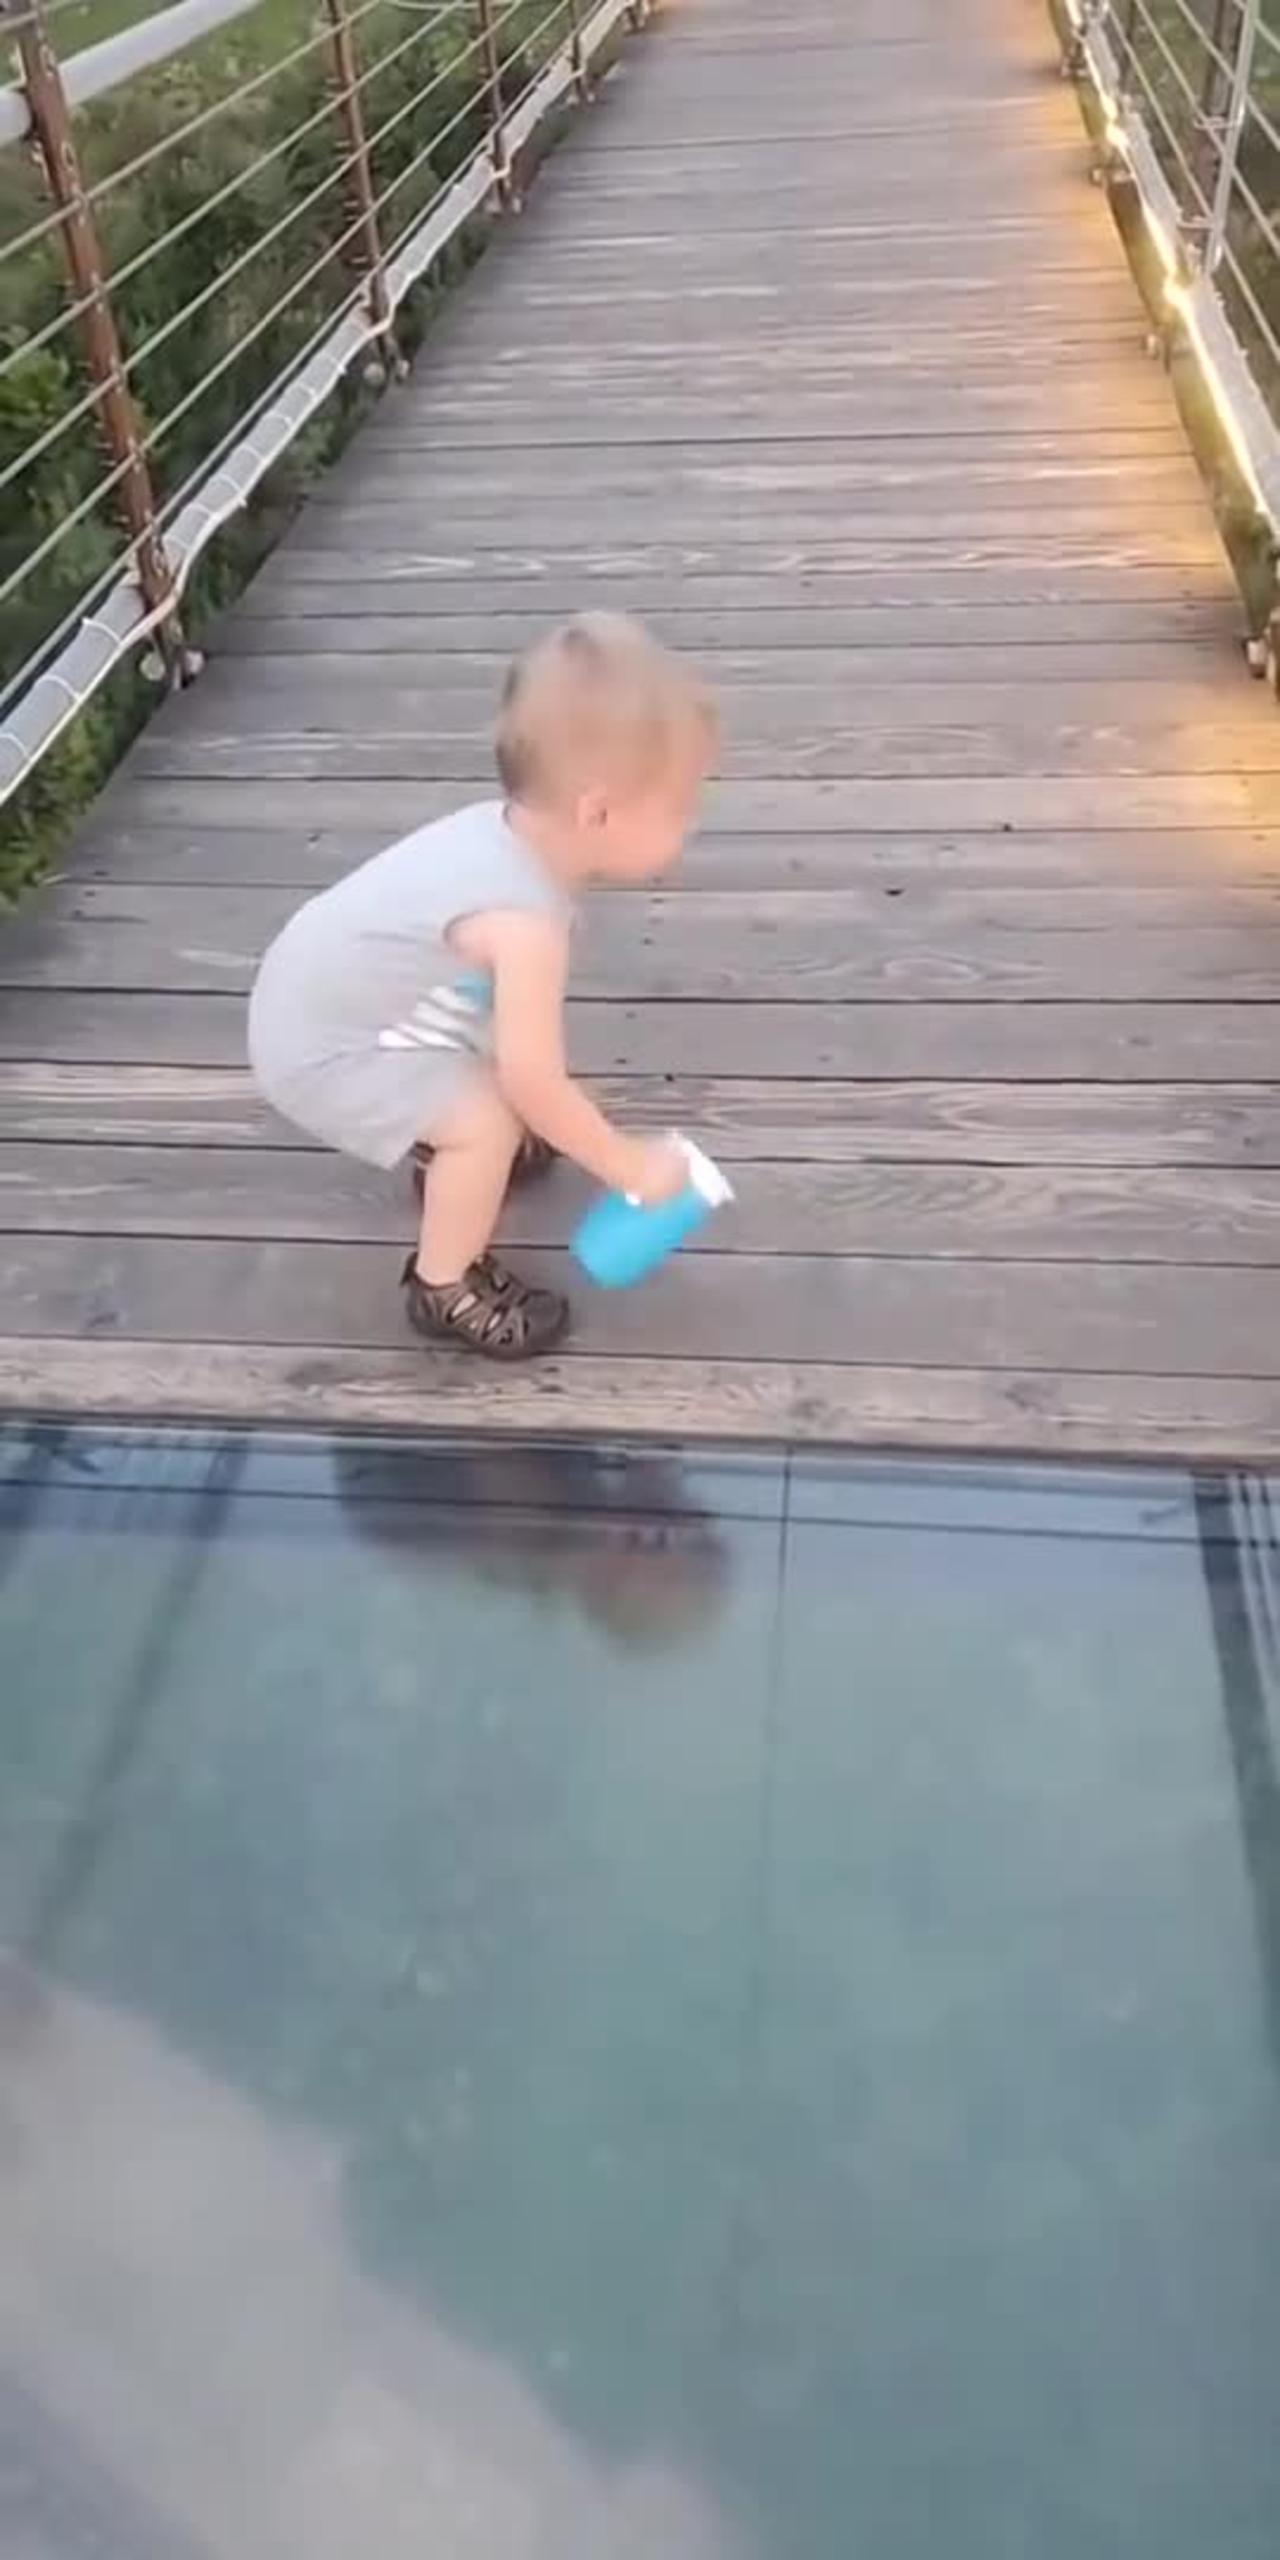 The kid is trying to cross the Glass Bridge